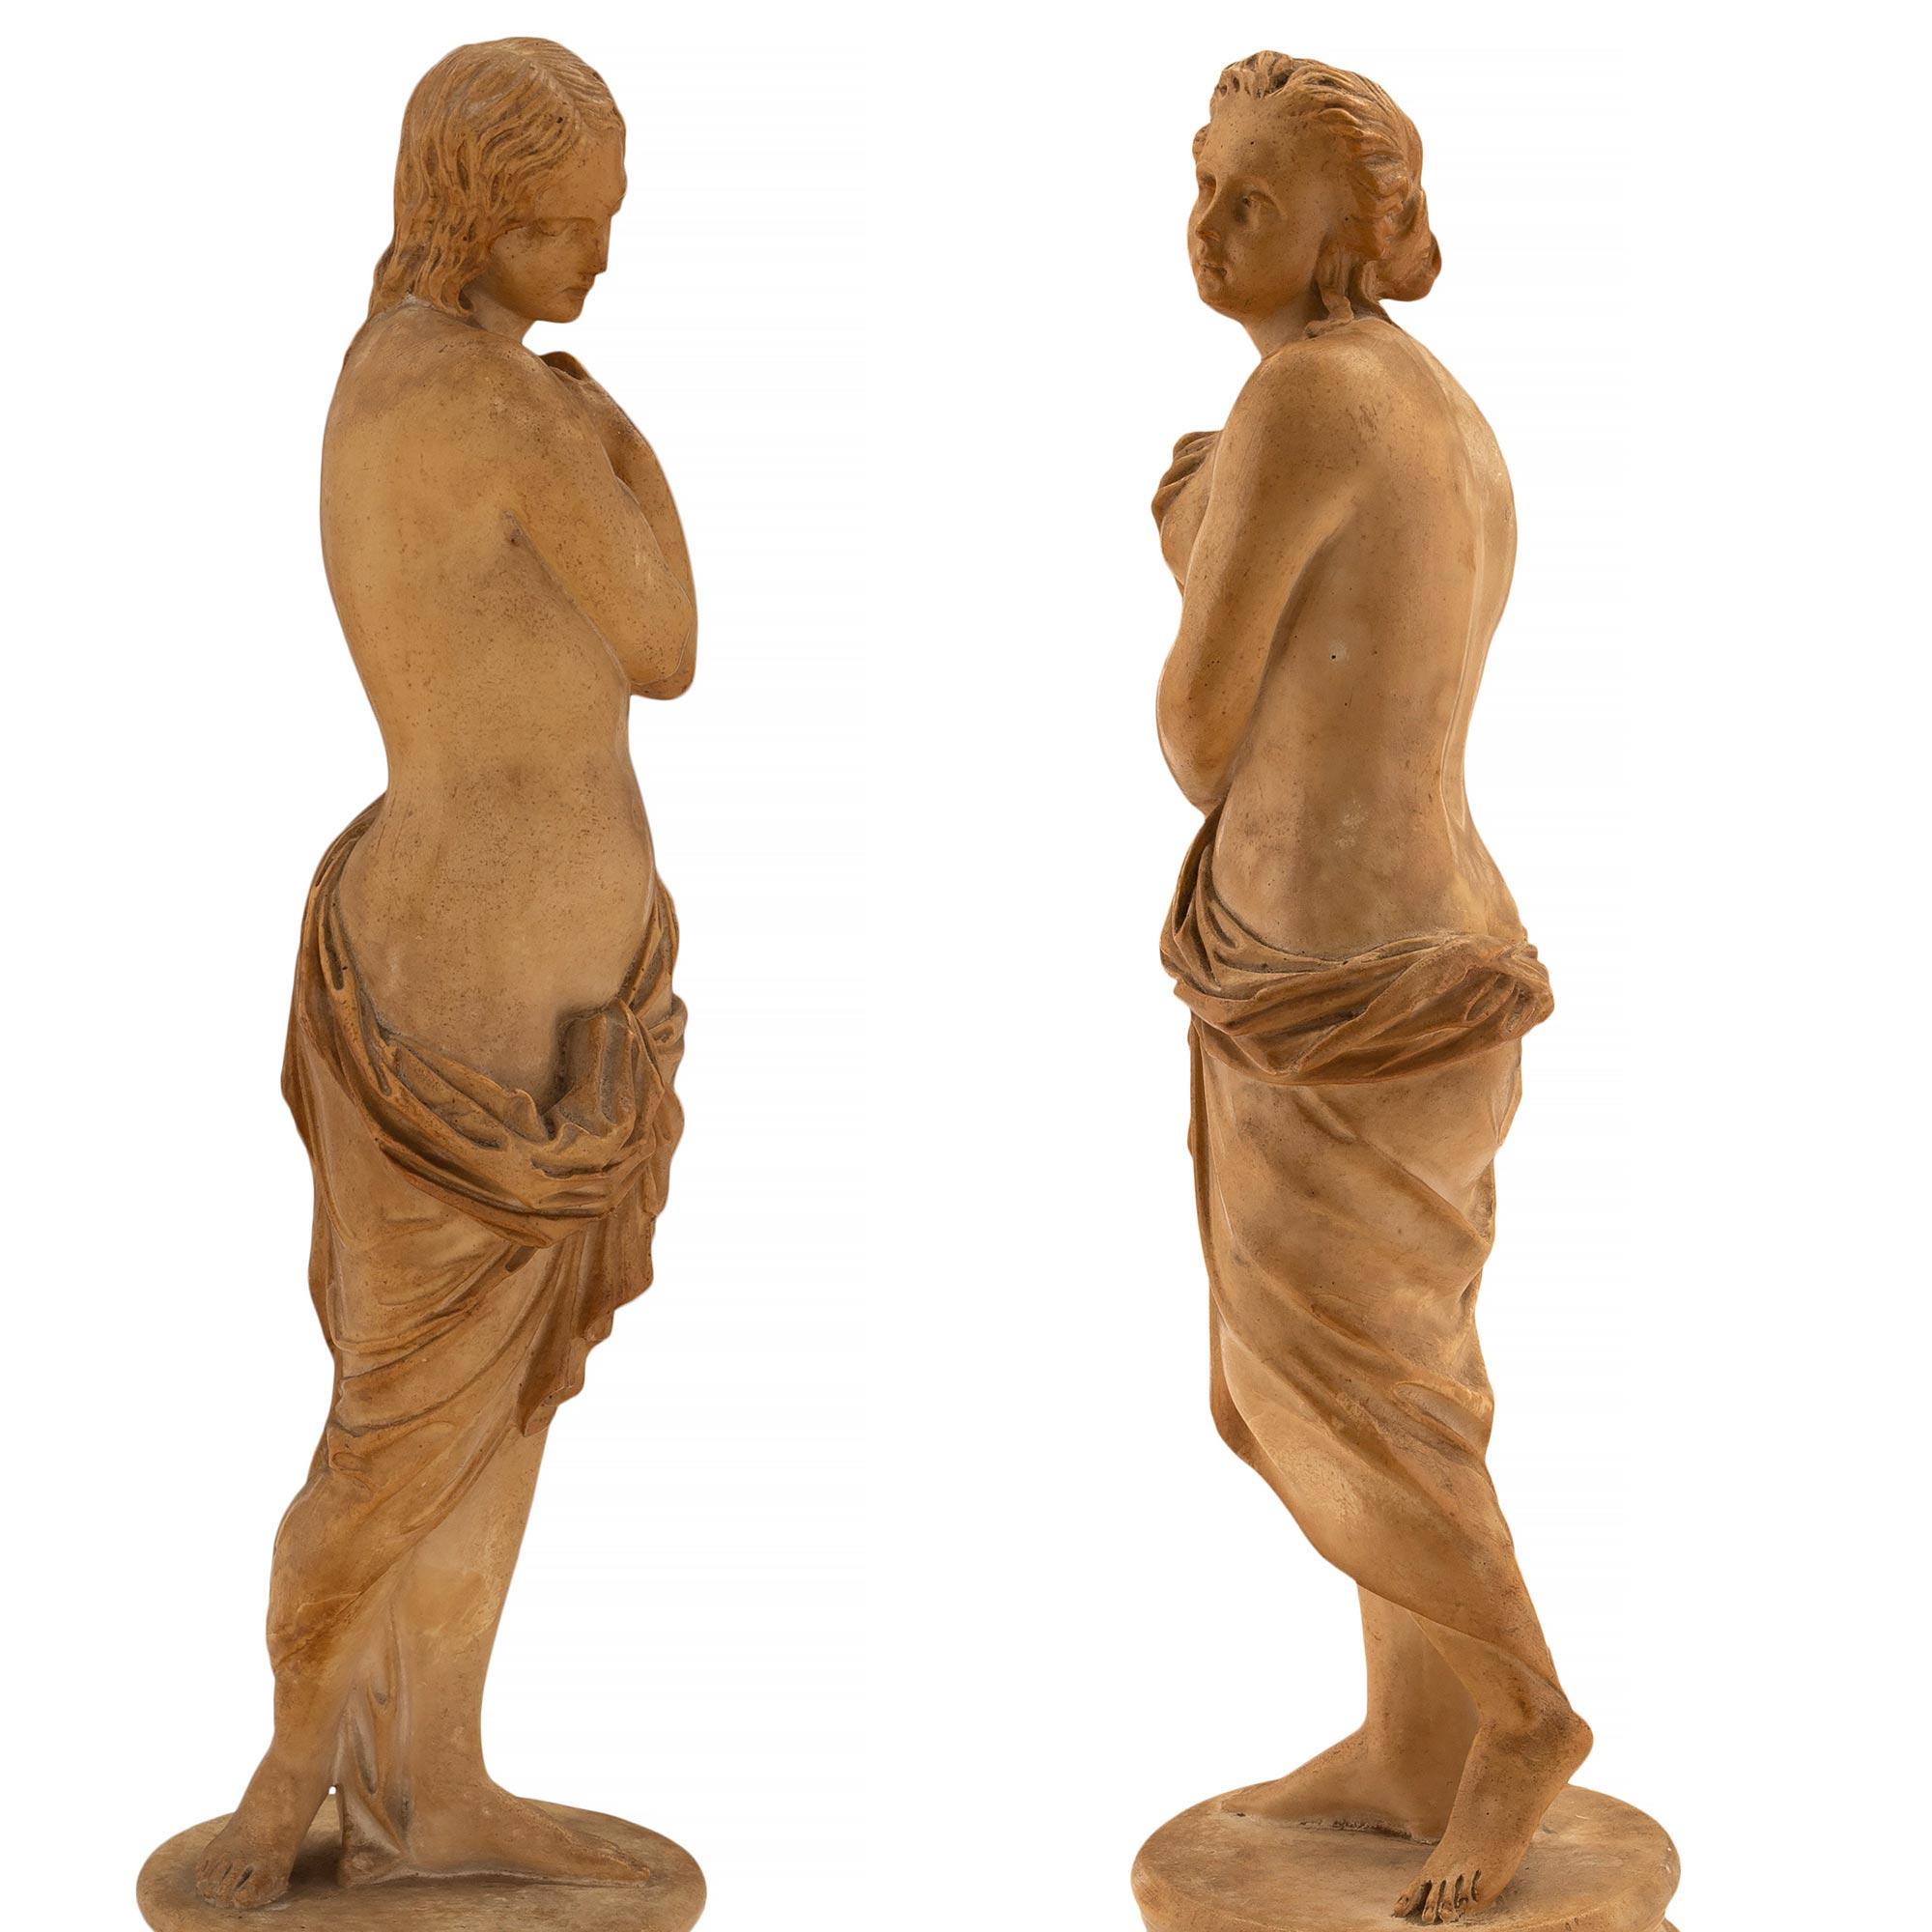 An exceptional and most charming true pair of Italian 18th century terra cotta statues. Each statue is raised by a mottled circular base where the elegant and wonderfully executed maidens stand. Each beautiful maiden is draped in detailed flowing